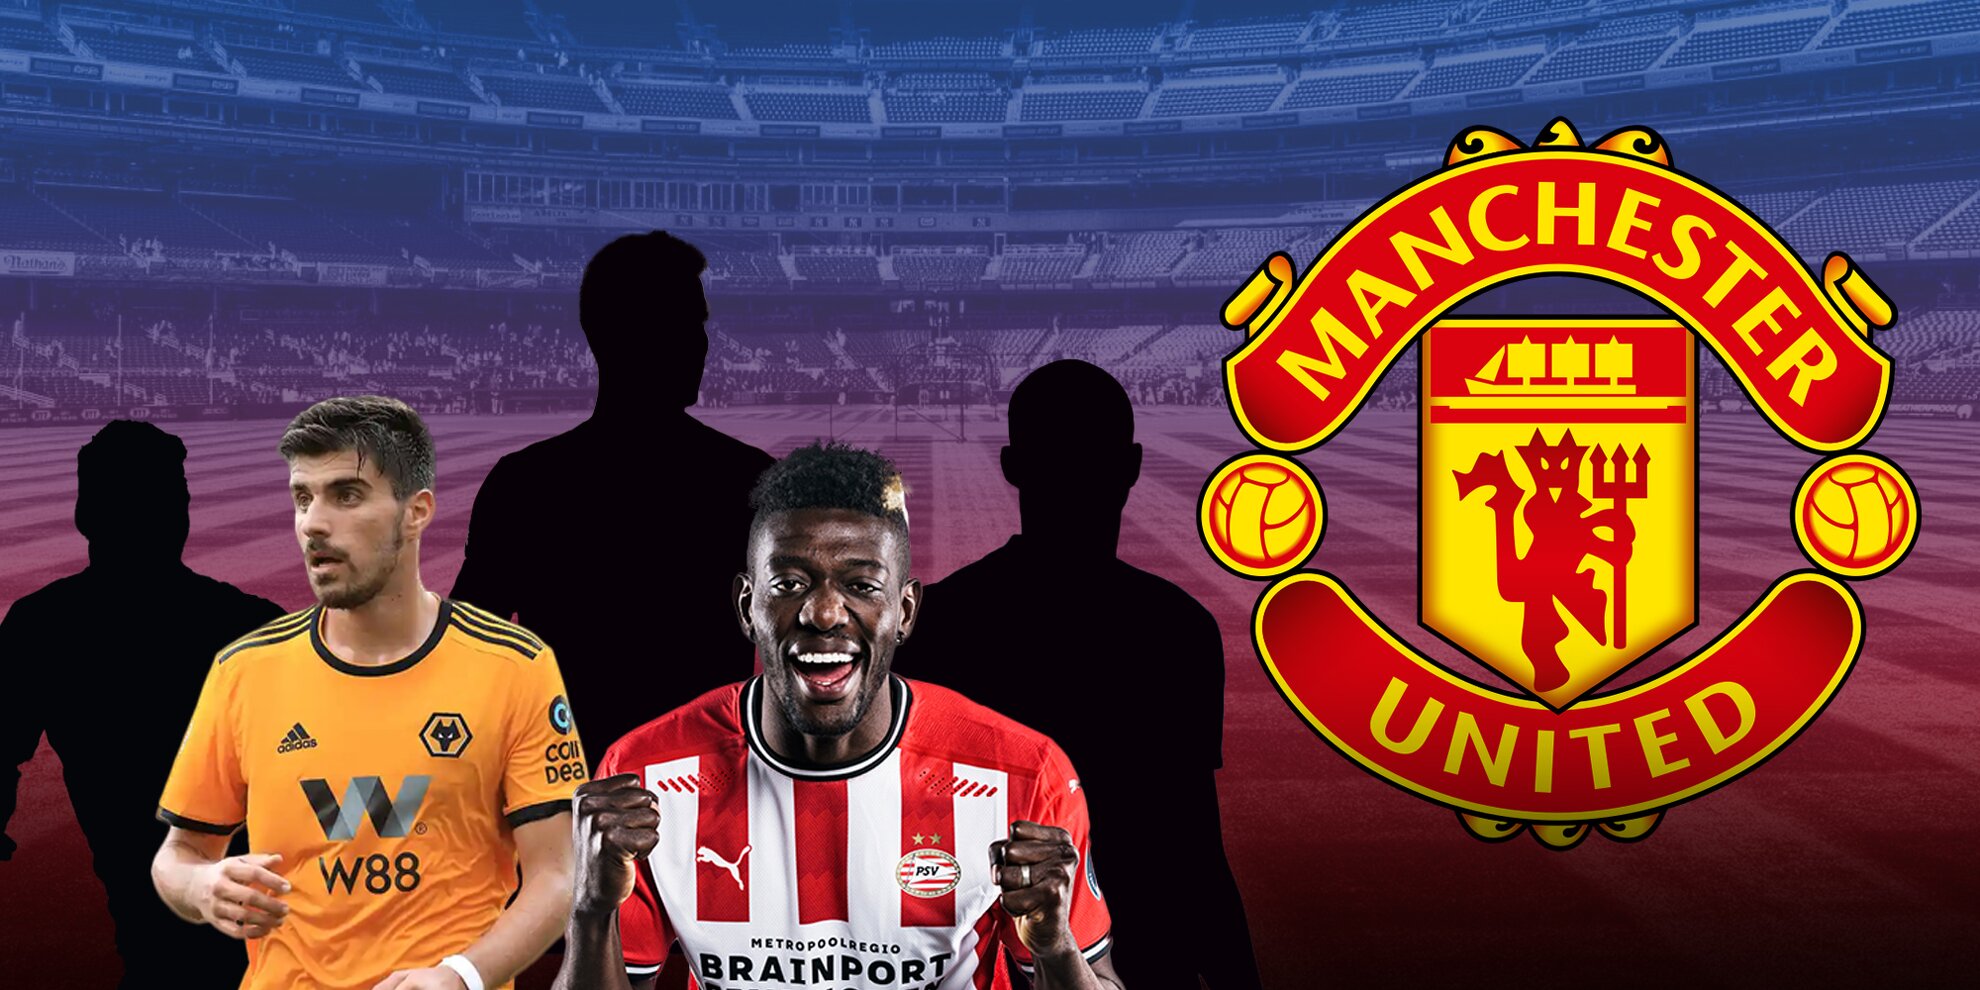 Defensive midfielders Manchester United should target this summer